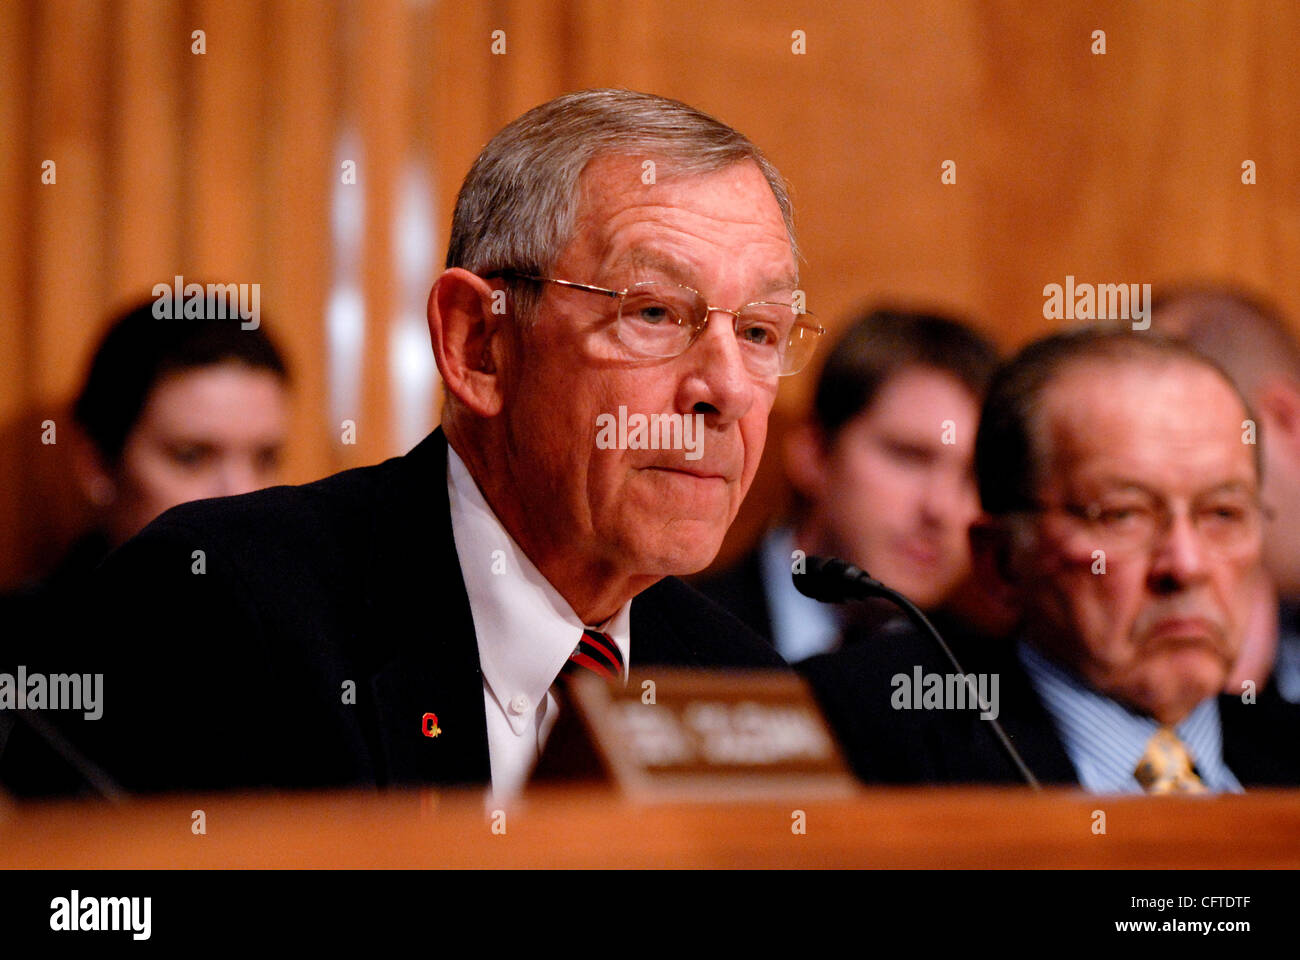 Jan 09, 2007 - Washington, DC, USA - Senator GEORGE VOINOVICH (R-OH) questions a panel before the Senate Committee on Homeland Security and Government Affairs hearing on implementing recommendations made by the 9/11 Commission. Stock Photo